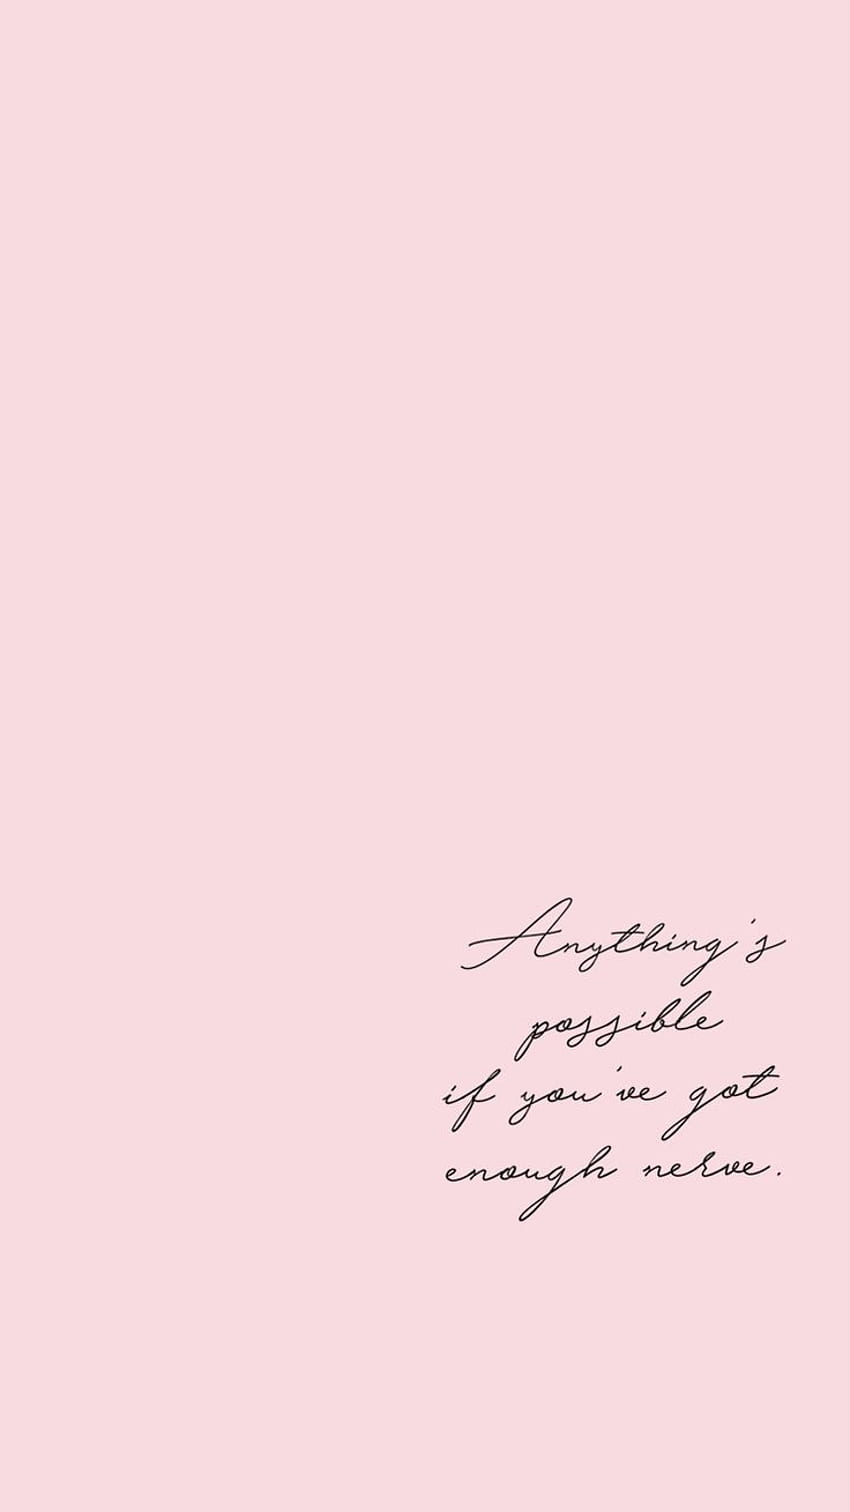 Self Love Quote Aesthetic Pastel, Cute Love Quote wallpaper ponsel HD